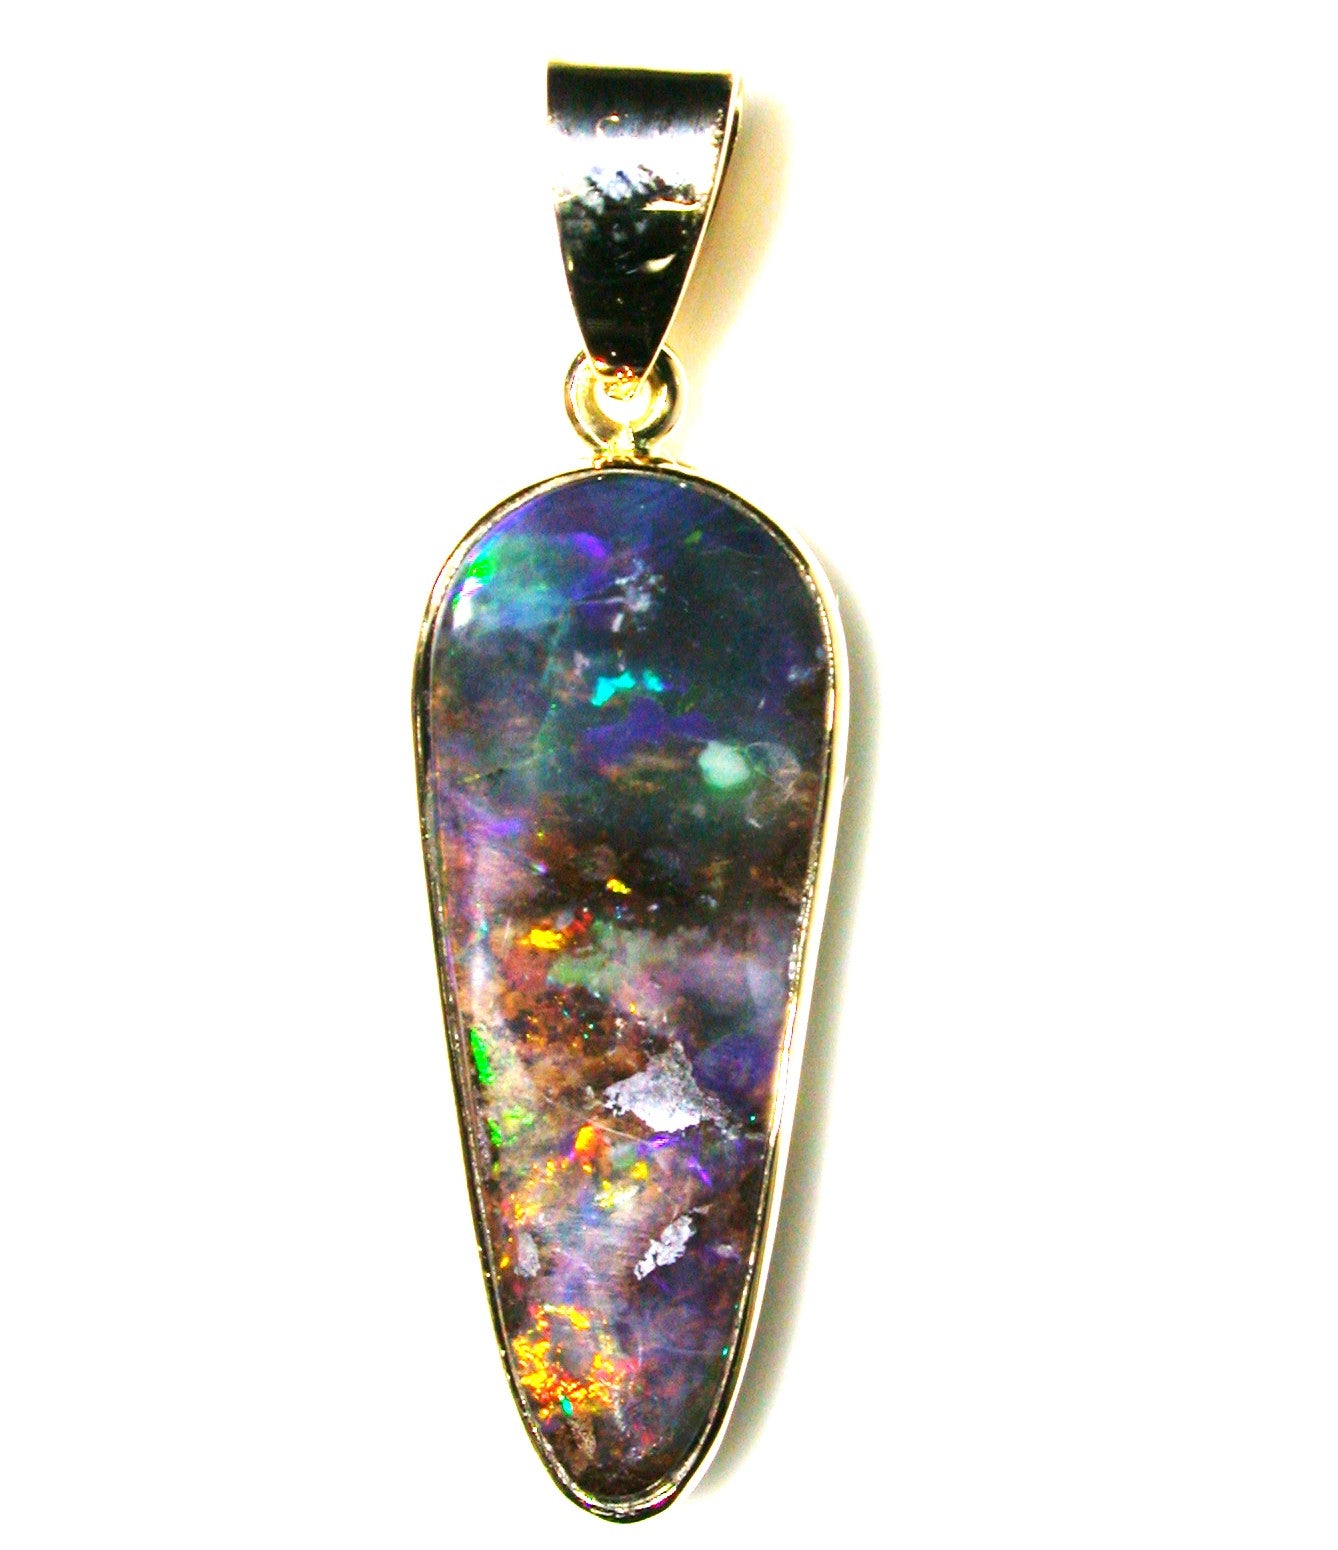 Green and Gold solid boulder opal pendant